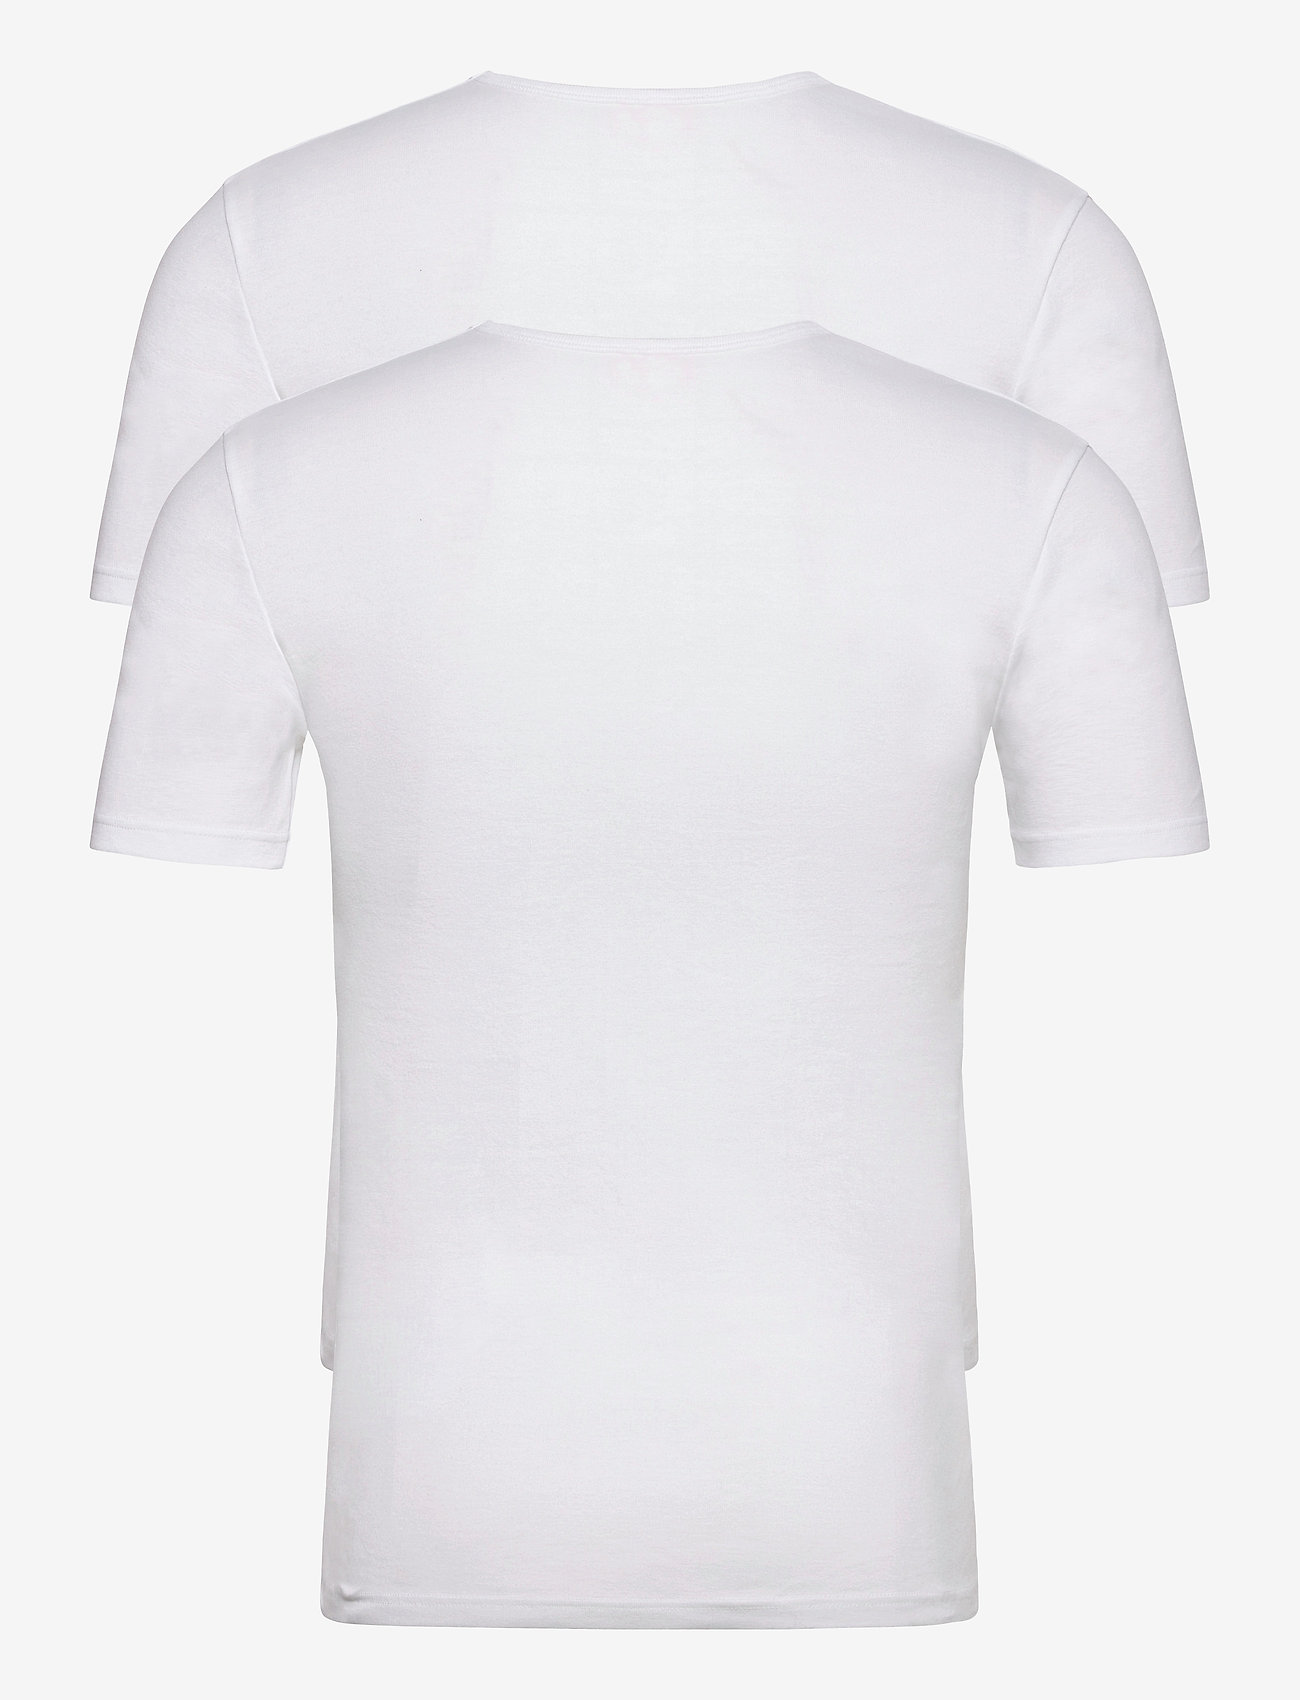 Armor Lux - Pack of 2 T-shirts Héritage - short-sleeved t-shirts - white/white - 1